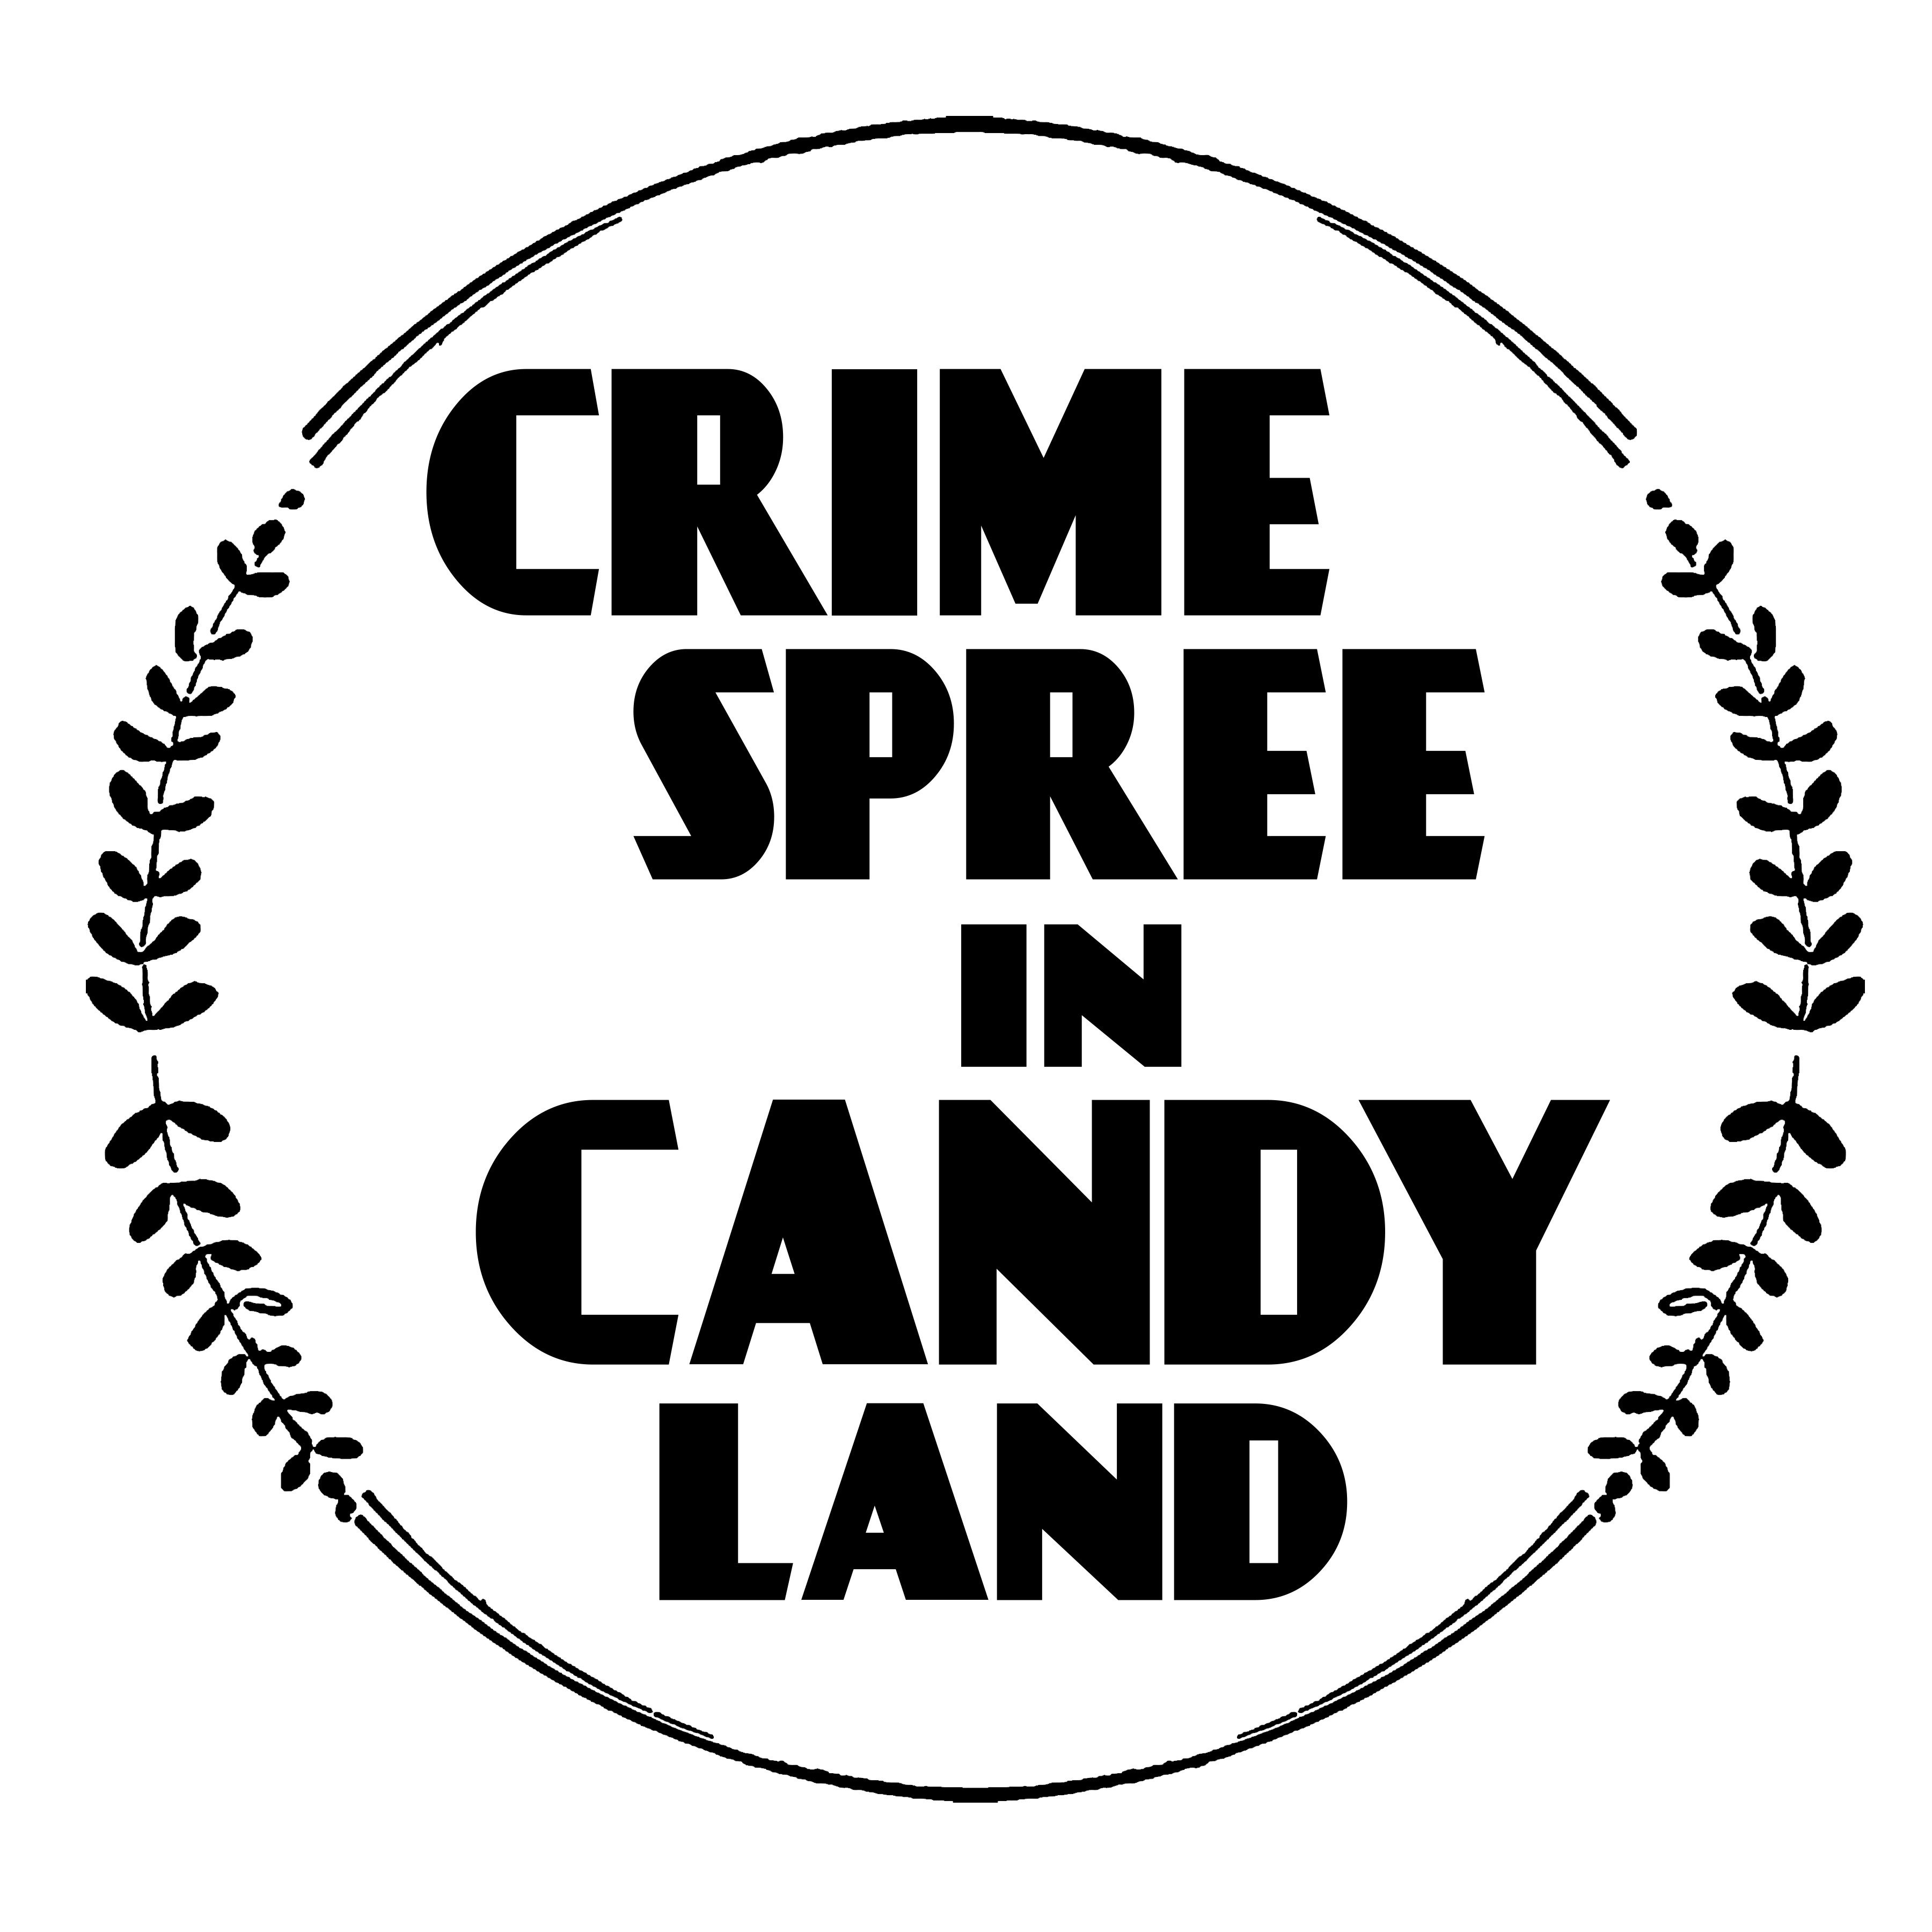 Los Angeles based Crime Spree in Candyland aka C.S.I.C. is an enigmatic mix of darker feel good music.